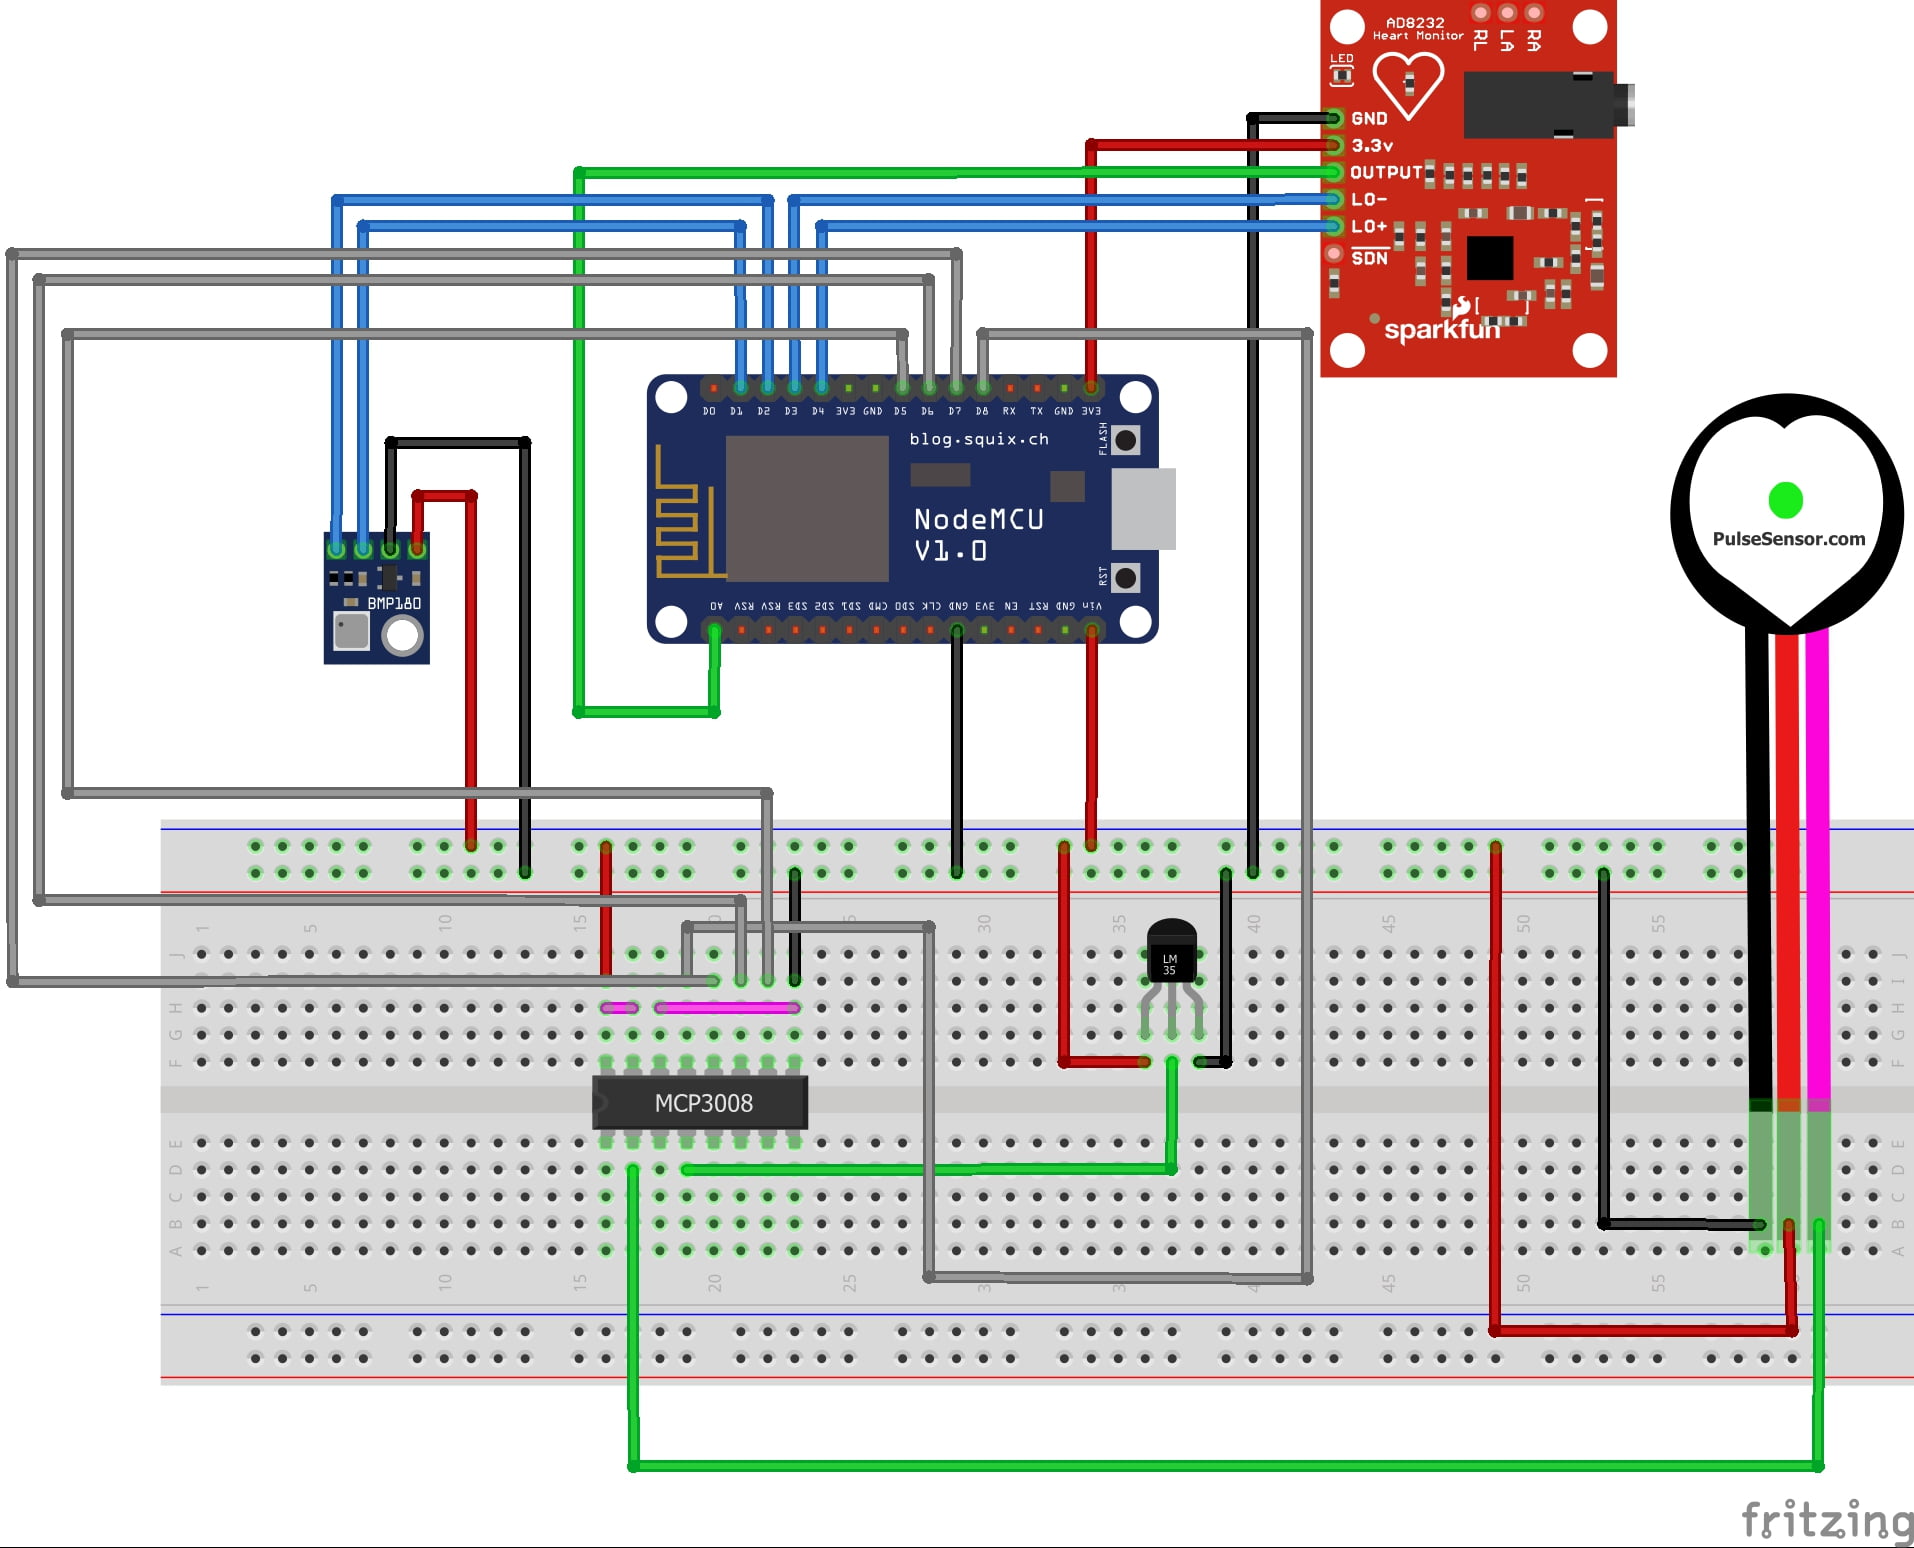 Smart band for Monitoring Health Service Node MCU